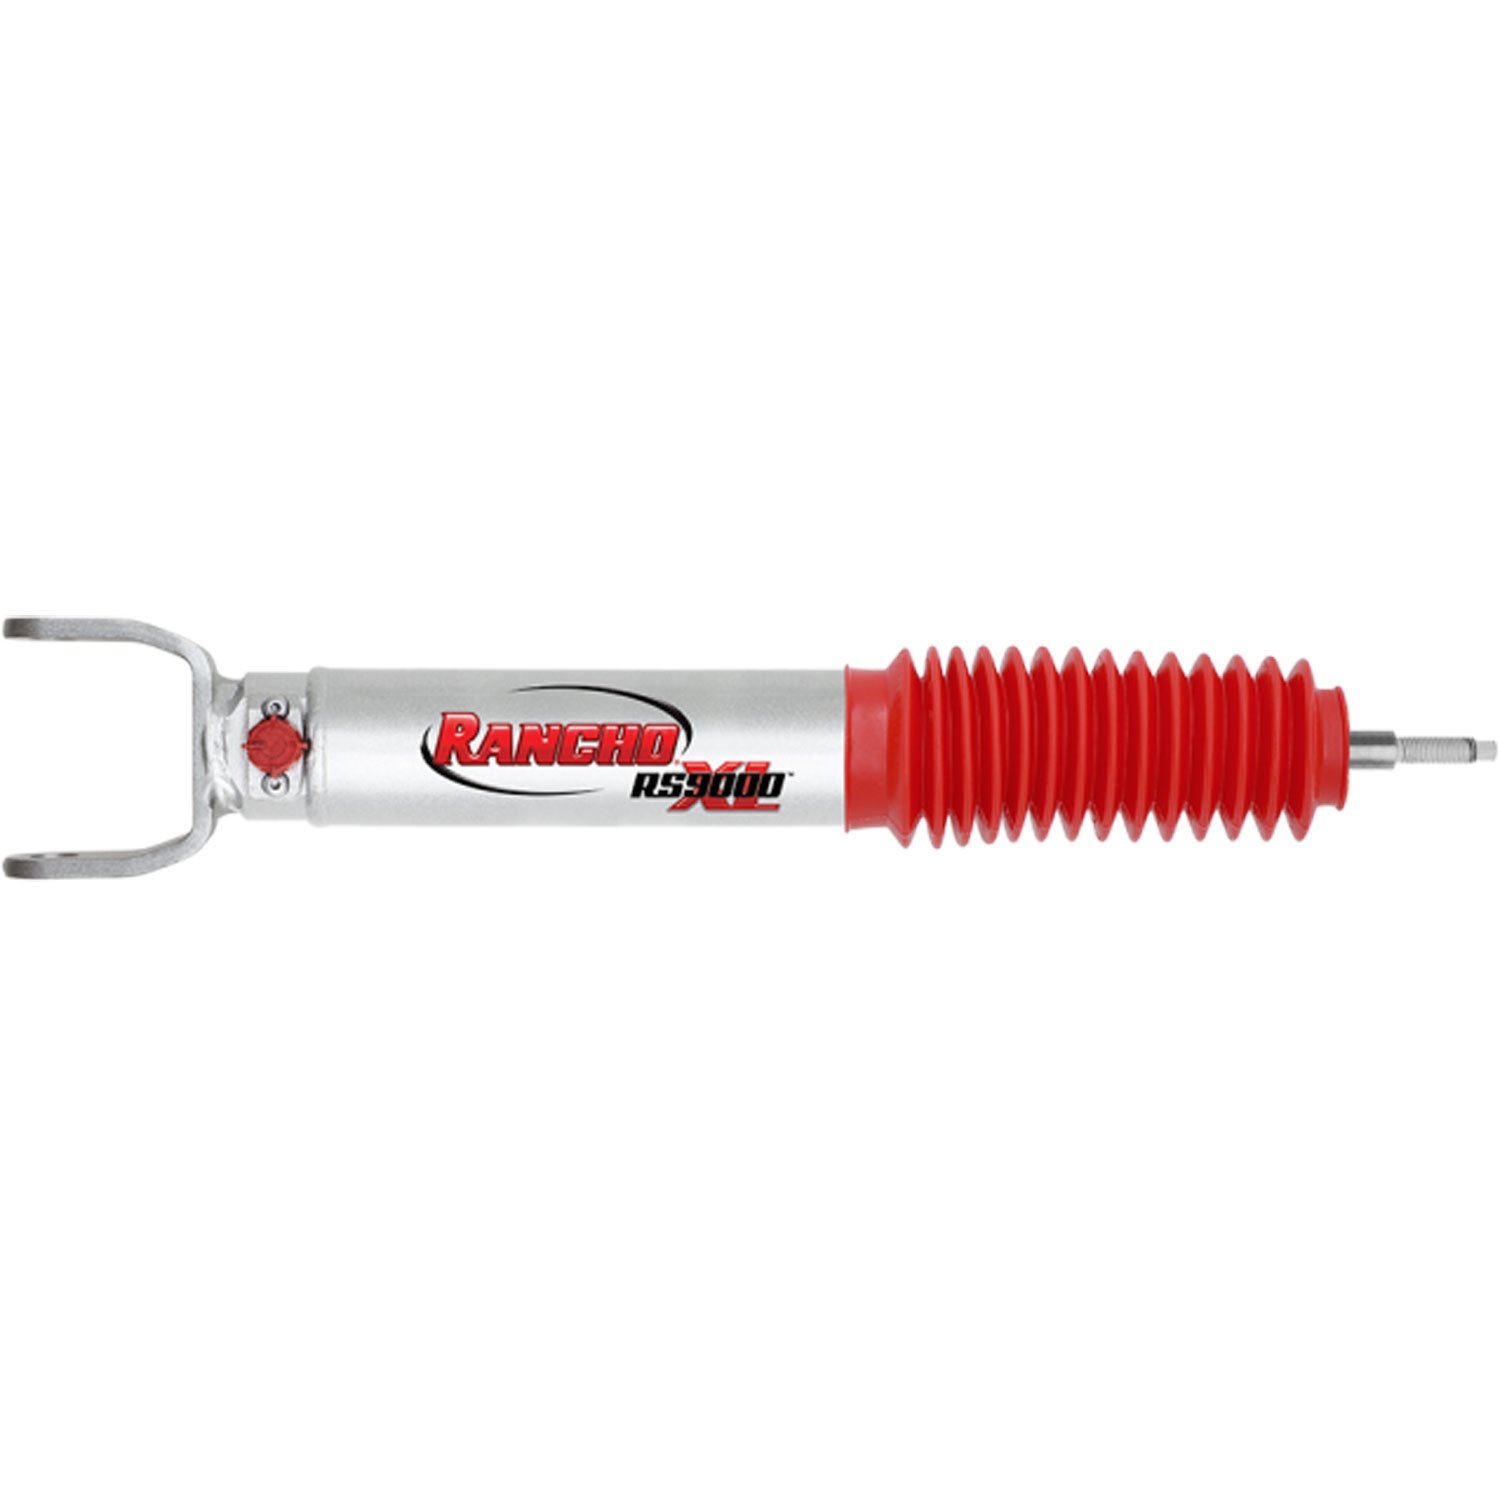 RS9000XL Rear Shock Absorber Fits GM Fullsize SUVs, Pickups and Chevy Avalanche